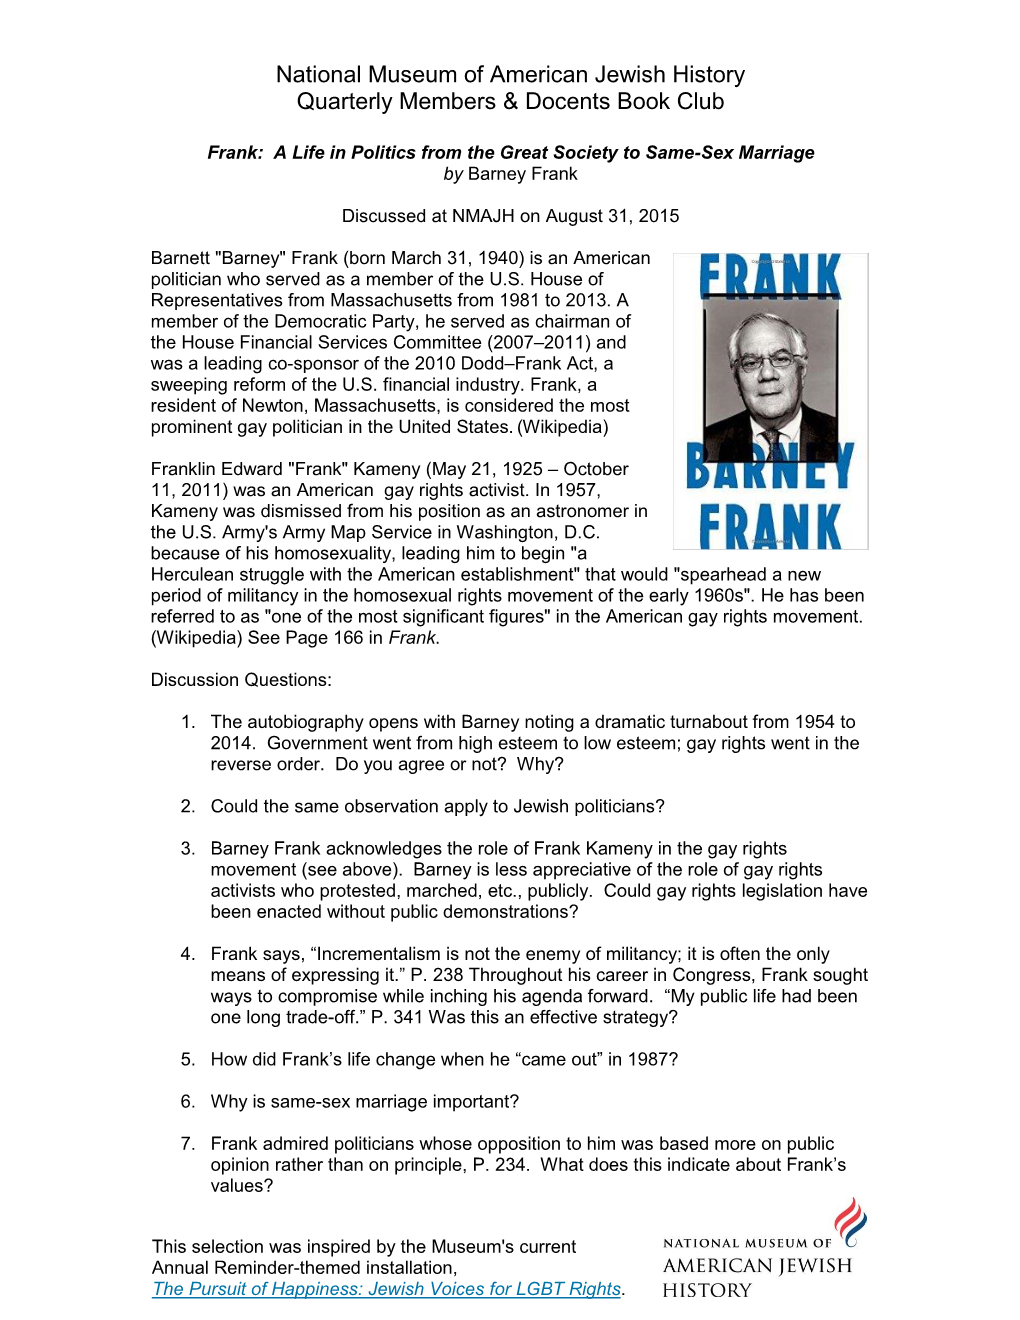 Frank: a Life in Politics from the Great Society to Same-Sex Marriage by Barney Frank